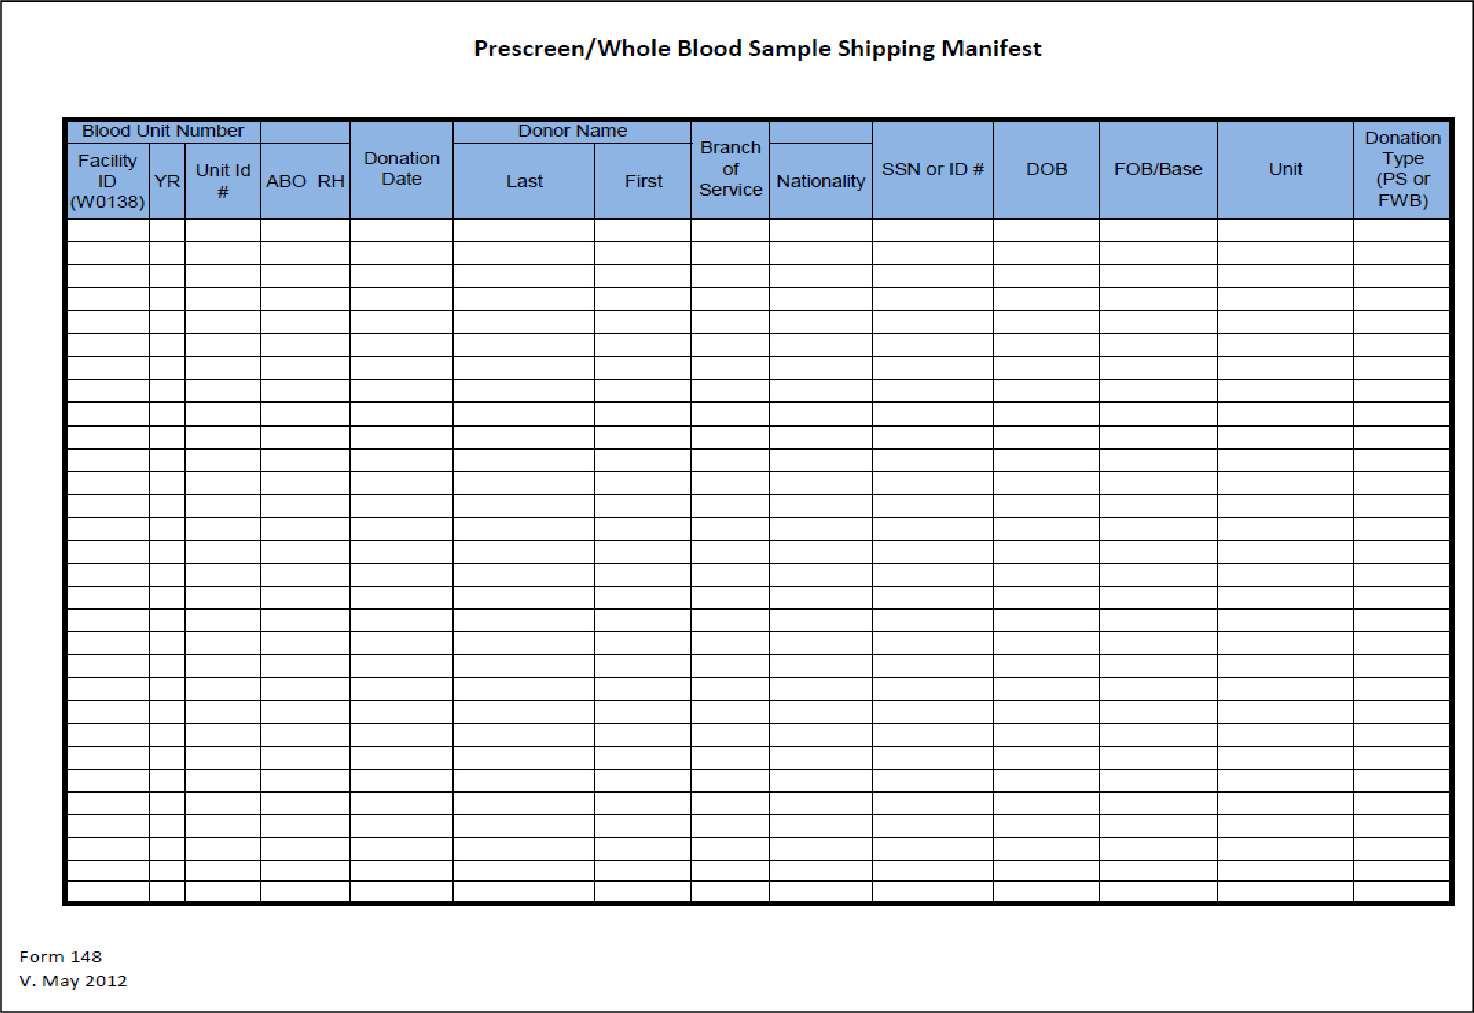 Form 148–Pre-Screen/Whole Blood Sample Shipping Manifest